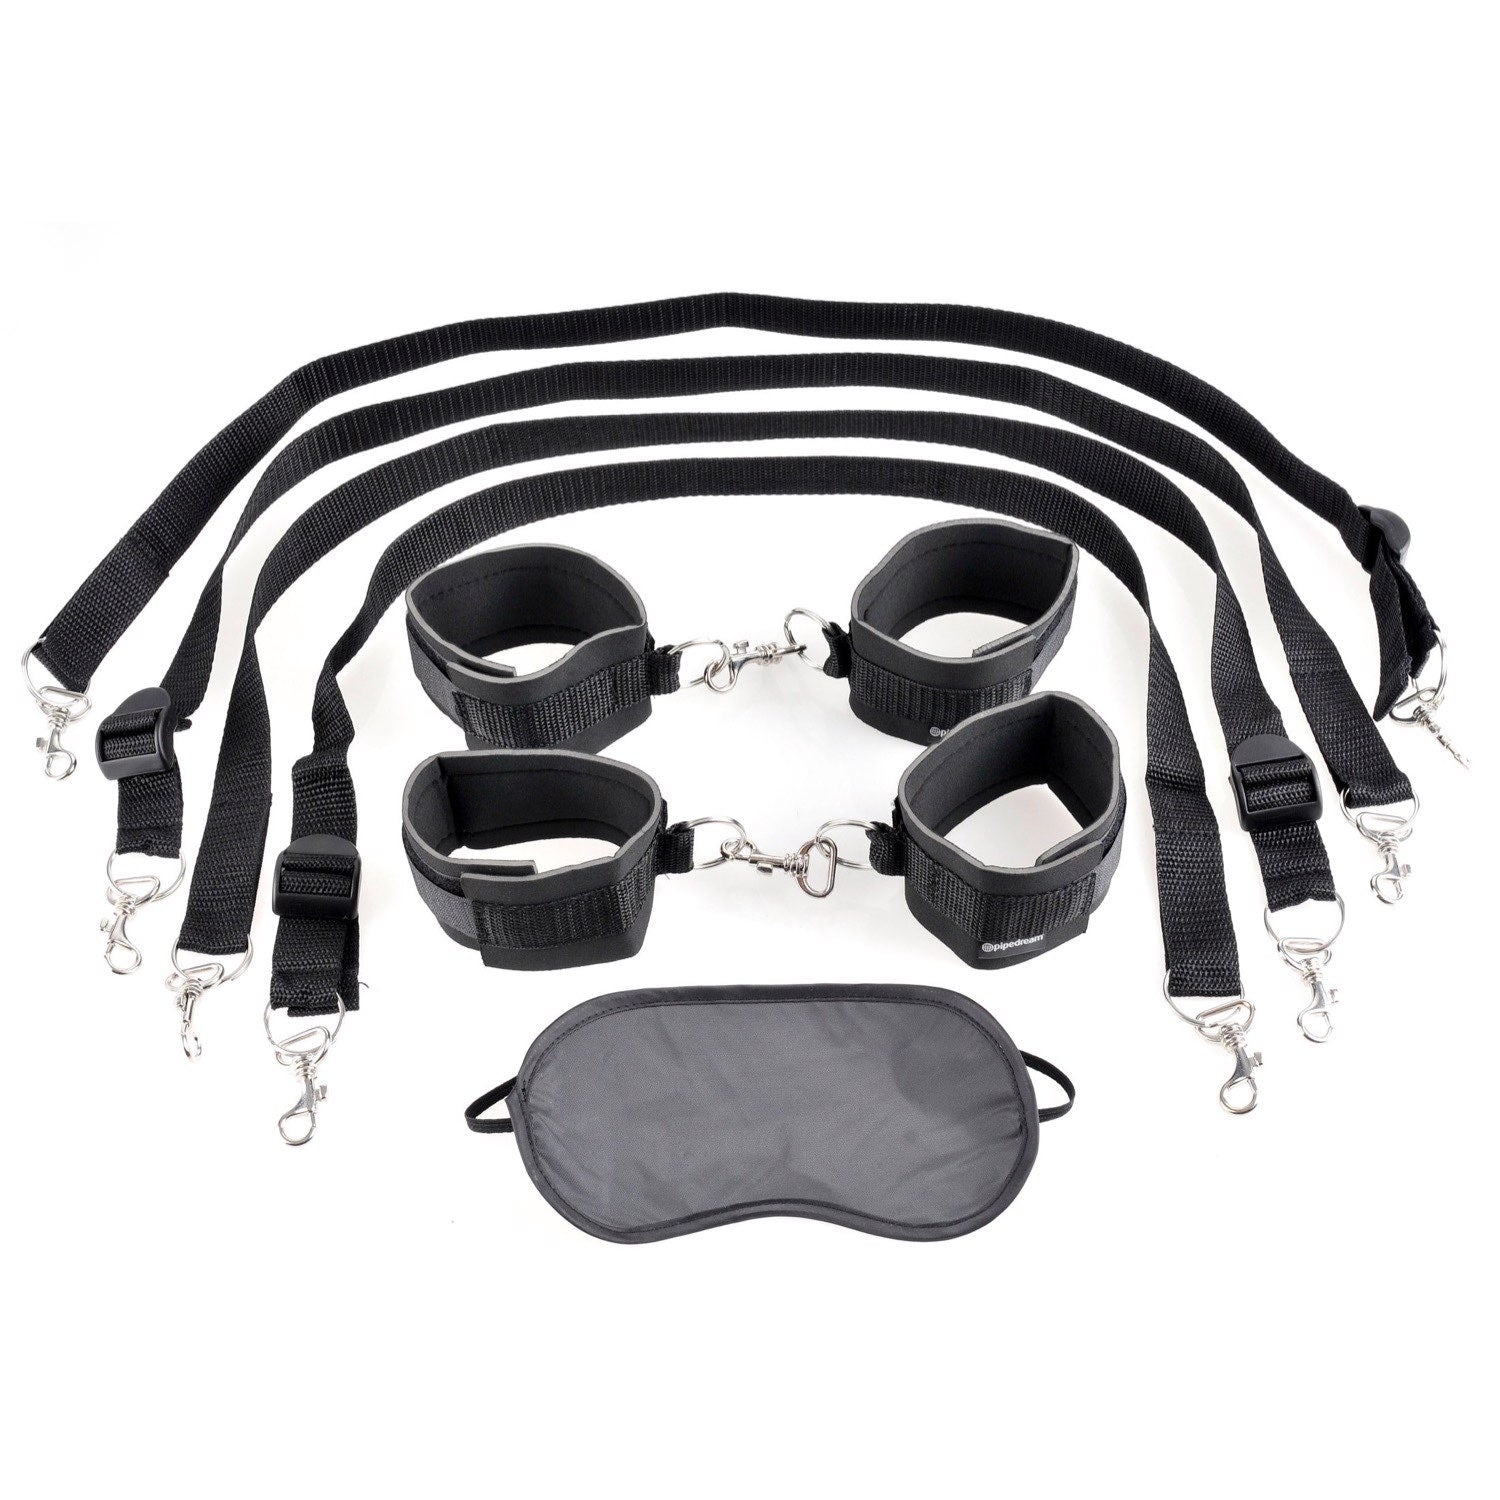 Fetish Fantasy Series Cuff &amp; Tether Set - Black Restraints by Pipedream